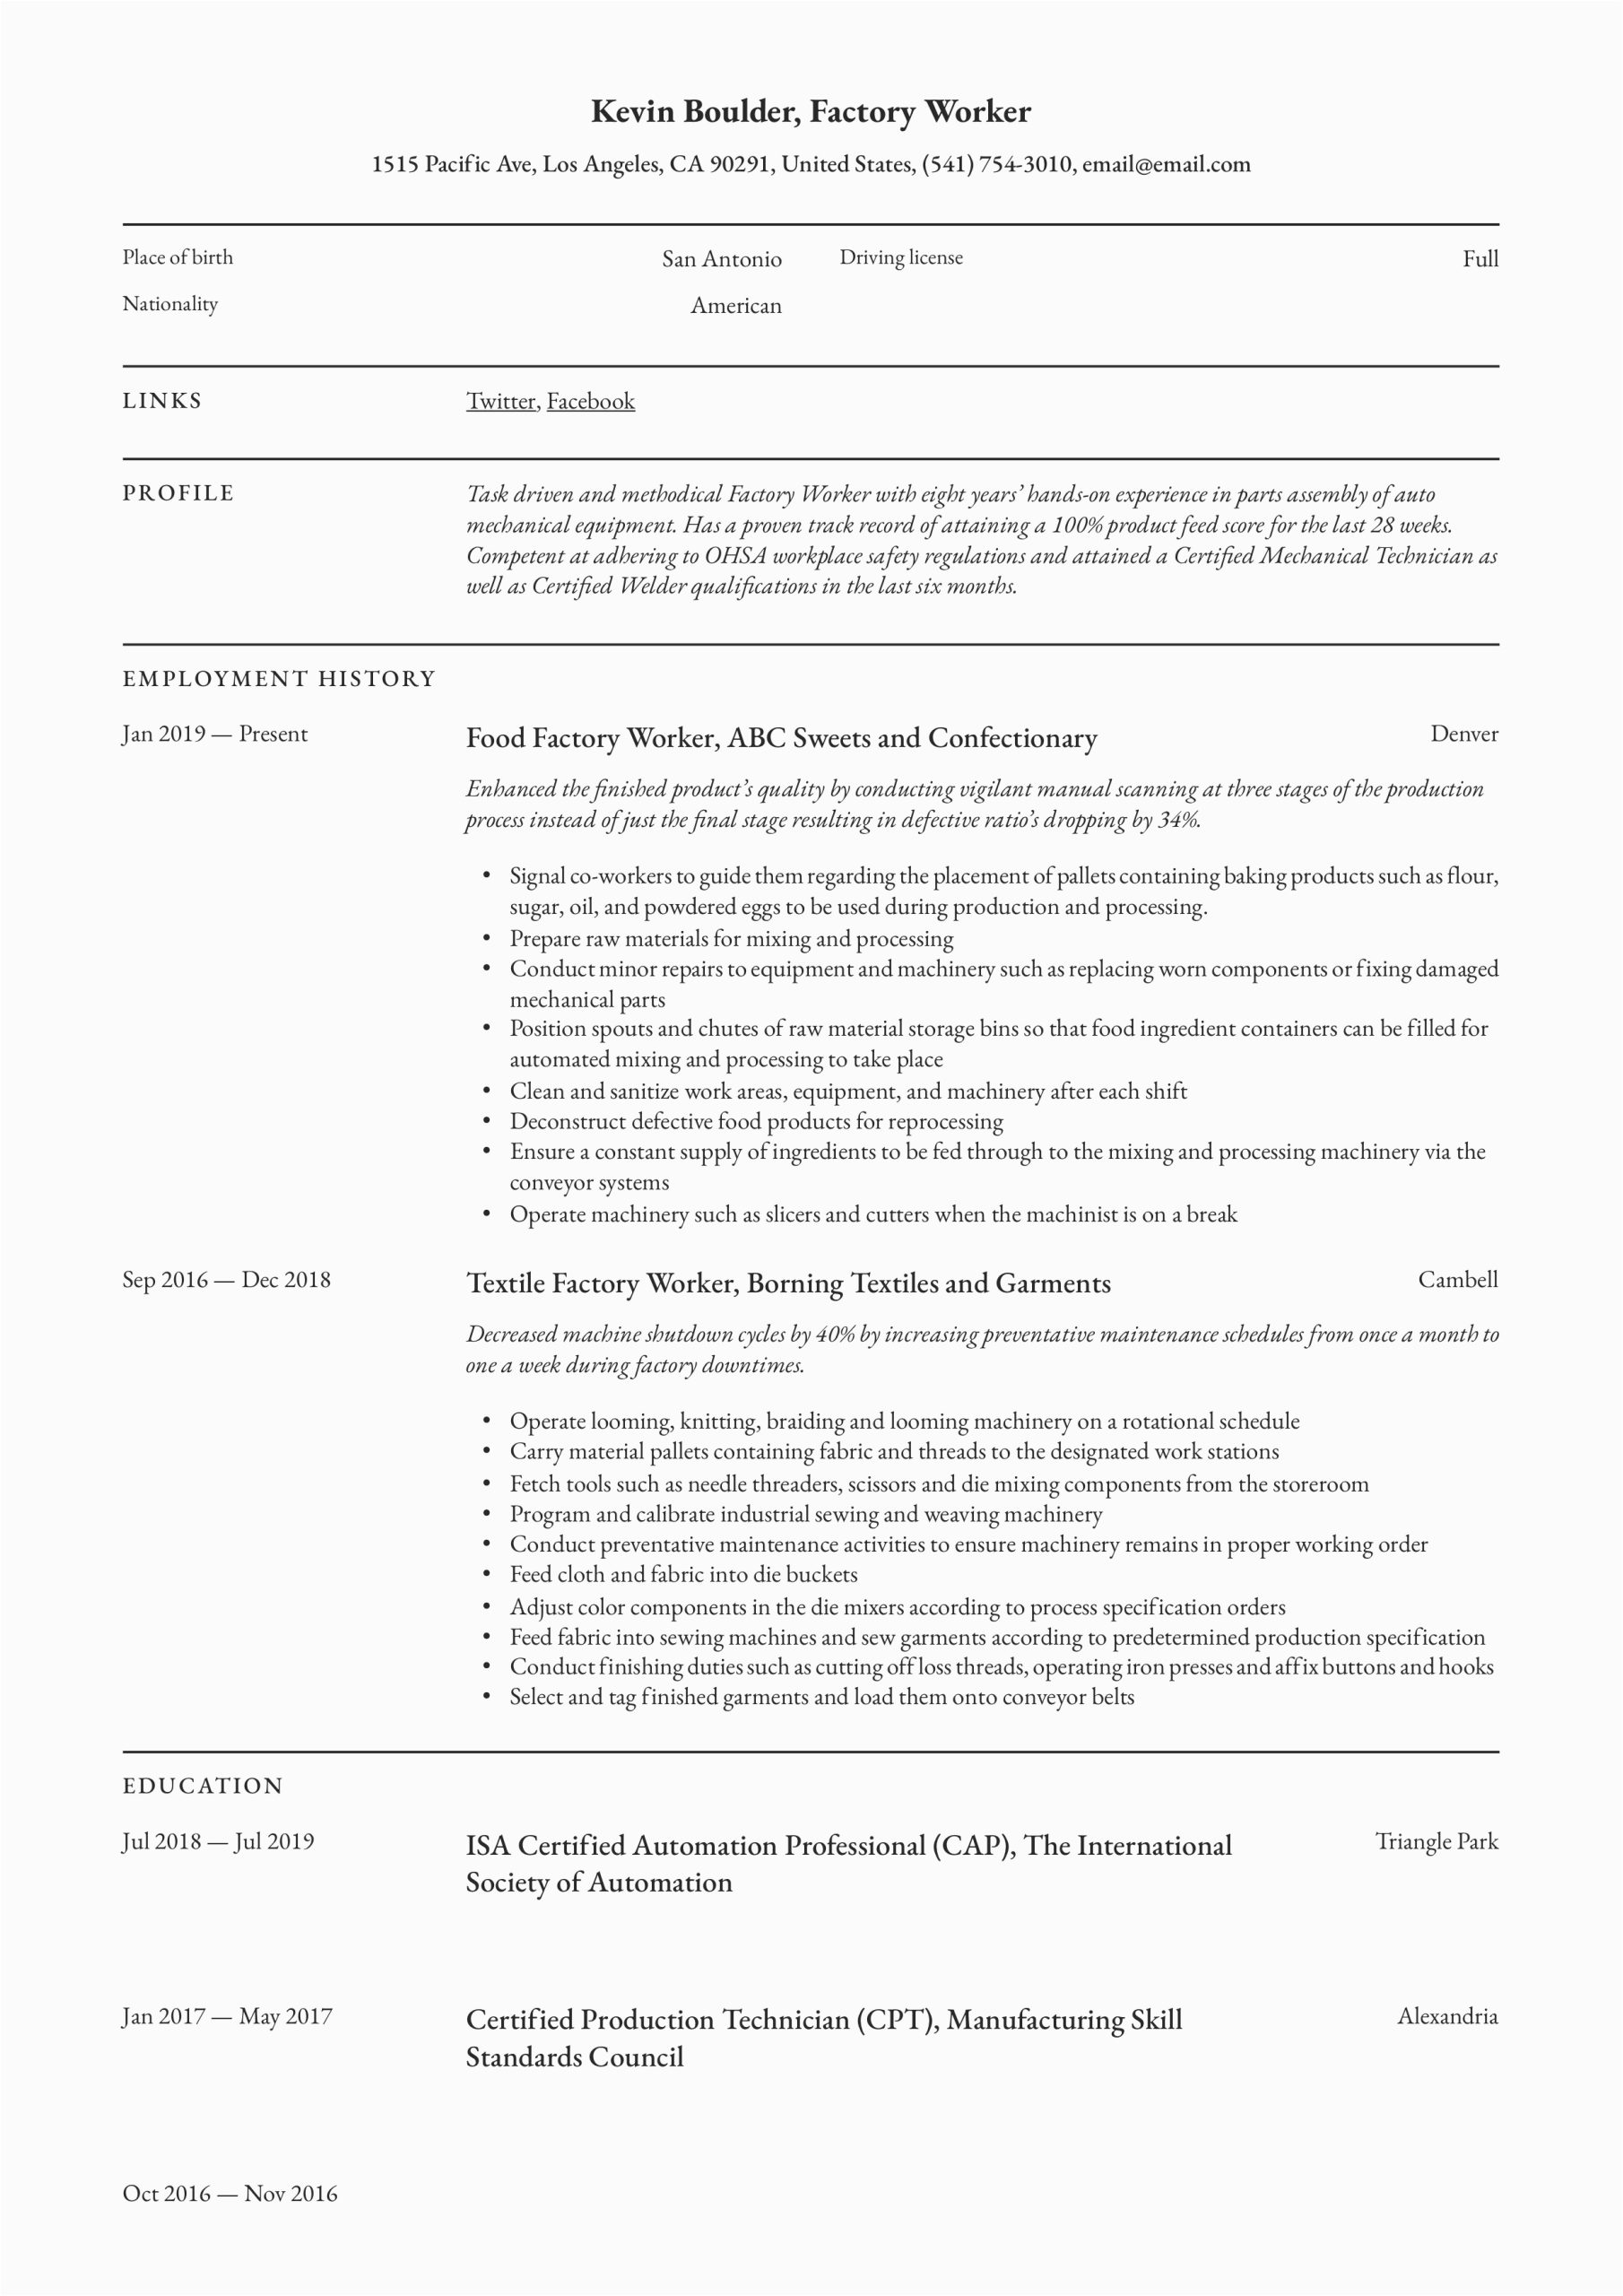 Sample Resume for Factory Worker Position Factory Worker Resume & Writing Guide